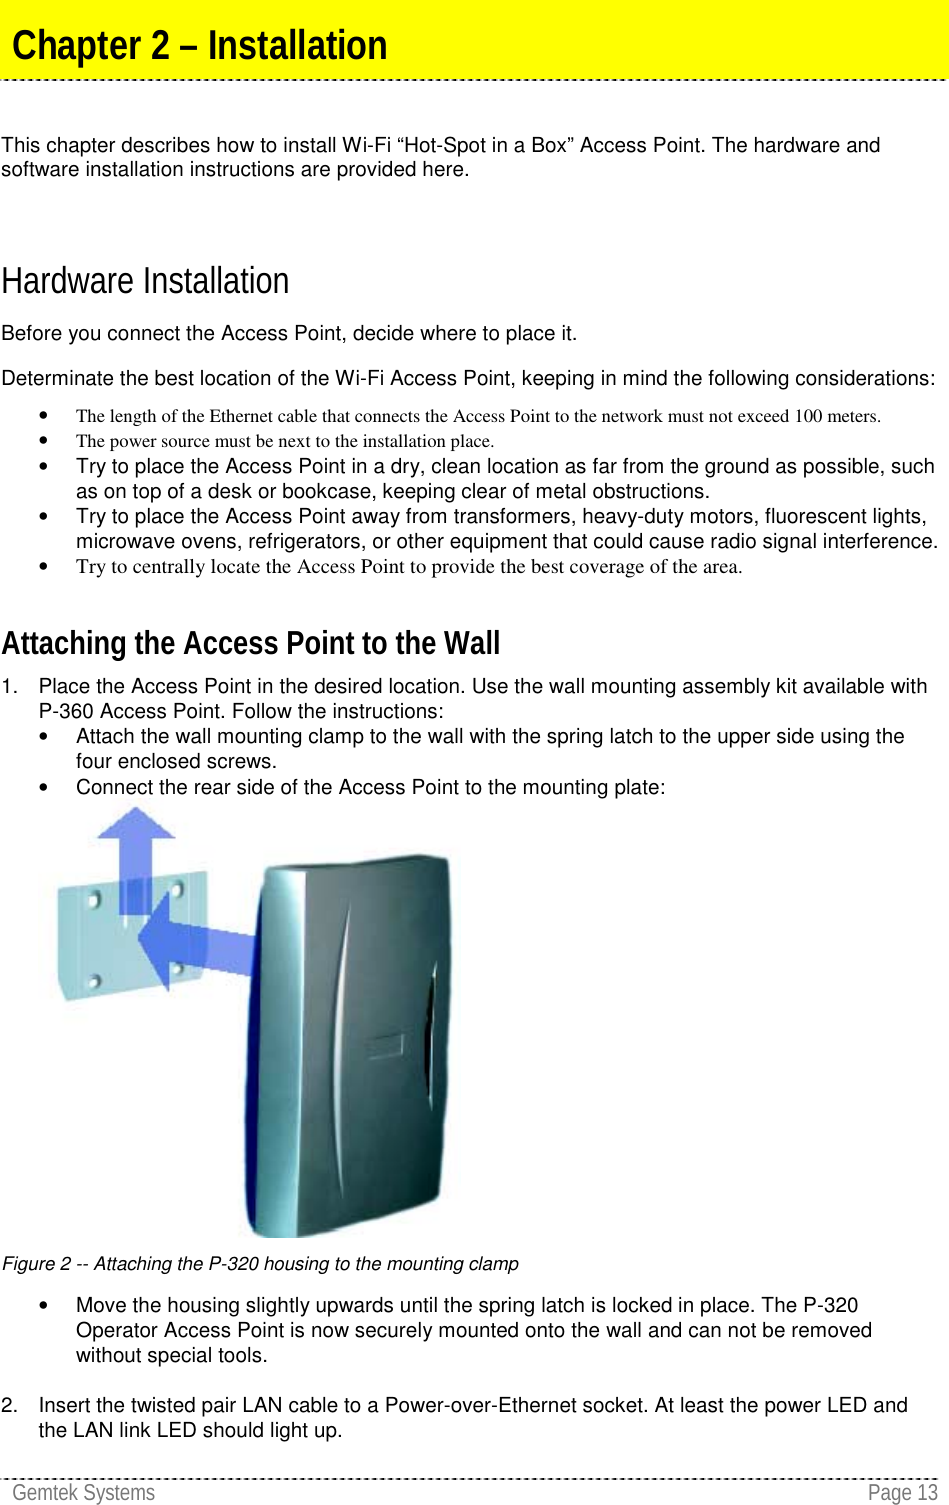 Gemtek Systems Page 13This chapter describes how to install Wi-Fi “Hot-Spot in a Box” Access Point. The hardware andsoftware installation instructions are provided here.Hardware InstallationBefore you connect the Access Point, decide where to place it.Determinate the best location of the Wi-Fi Access Point, keeping in mind the following considerations:• The length of the Ethernet cable that connects the Access Point to the network must not exceed 100 meters.• The power source must be next to the installation place.•  Try to place the Access Point in a dry, clean location as far from the ground as possible, suchas on top of a desk or bookcase, keeping clear of metal obstructions.•  Try to place the Access Point away from transformers, heavy-duty motors, fluorescent lights,microwave ovens, refrigerators, or other equipment that could cause radio signal interference.• Try to centrally locate the Access Point to provide the best coverage of the area.Attaching the Access Point to the Wall1.  Place the Access Point in the desired location. Use the wall mounting assembly kit available withP-360 Access Point. Follow the instructions:•  Attach the wall mounting clamp to the wall with the spring latch to the upper side using thefour enclosed screws.•  Connect the rear side of the Access Point to the mounting plate:Figure 2 -- Attaching the P-320 housing to the mounting clamp•  Move the housing slightly upwards until the spring latch is locked in place. The P-320Operator Access Point is now securely mounted onto the wall and can not be removedwithout special tools.2.  Insert the twisted pair LAN cable to a Power-over-Ethernet socket. At least the power LED andthe LAN link LED should light up.Chapter 2 – Installation